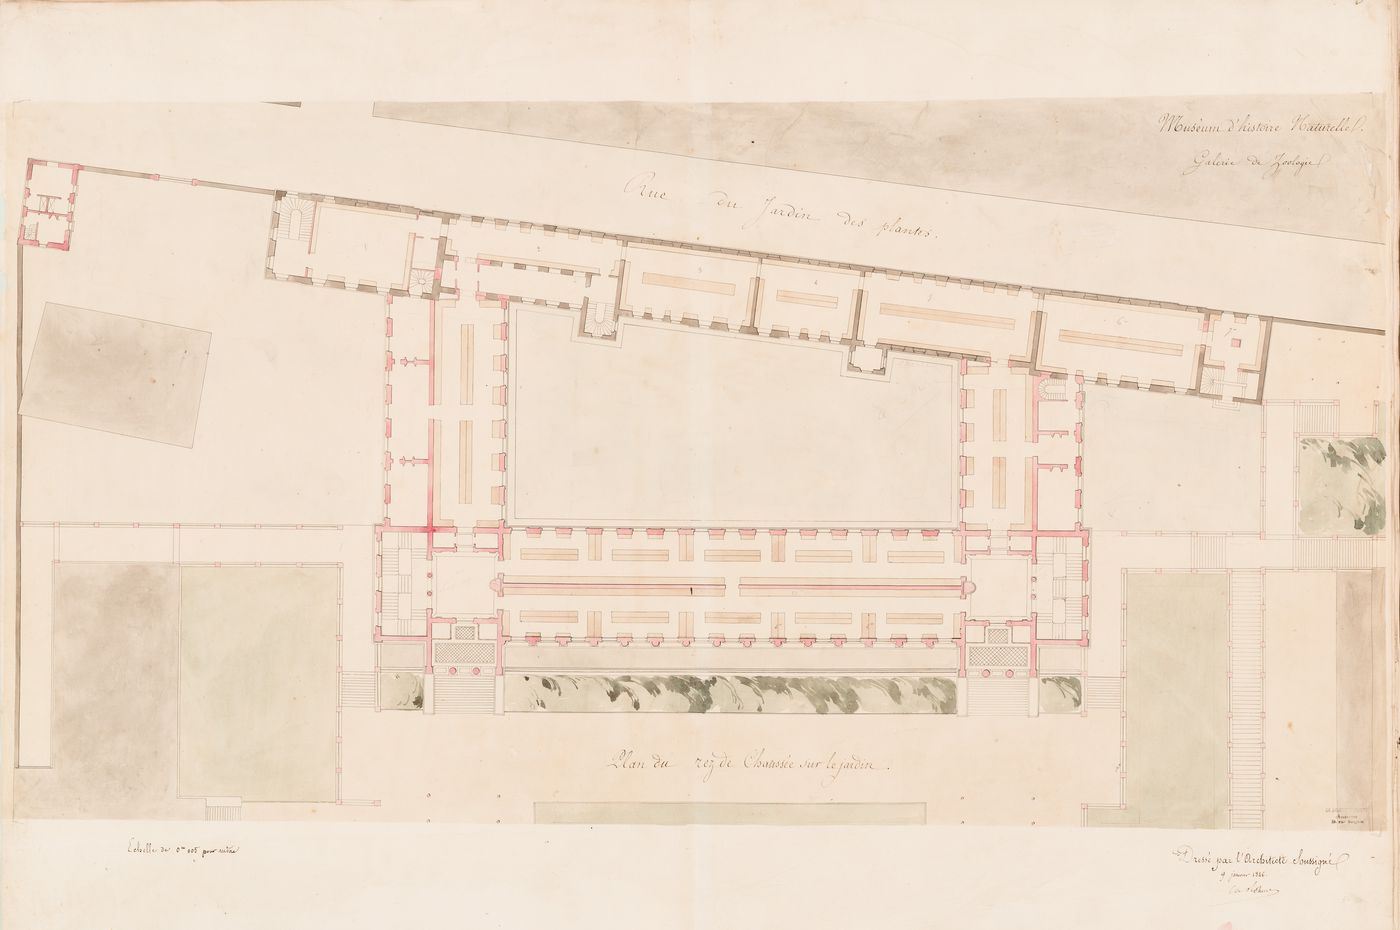 Project for a Galerie de zoologie, 1846: Ground floor plan